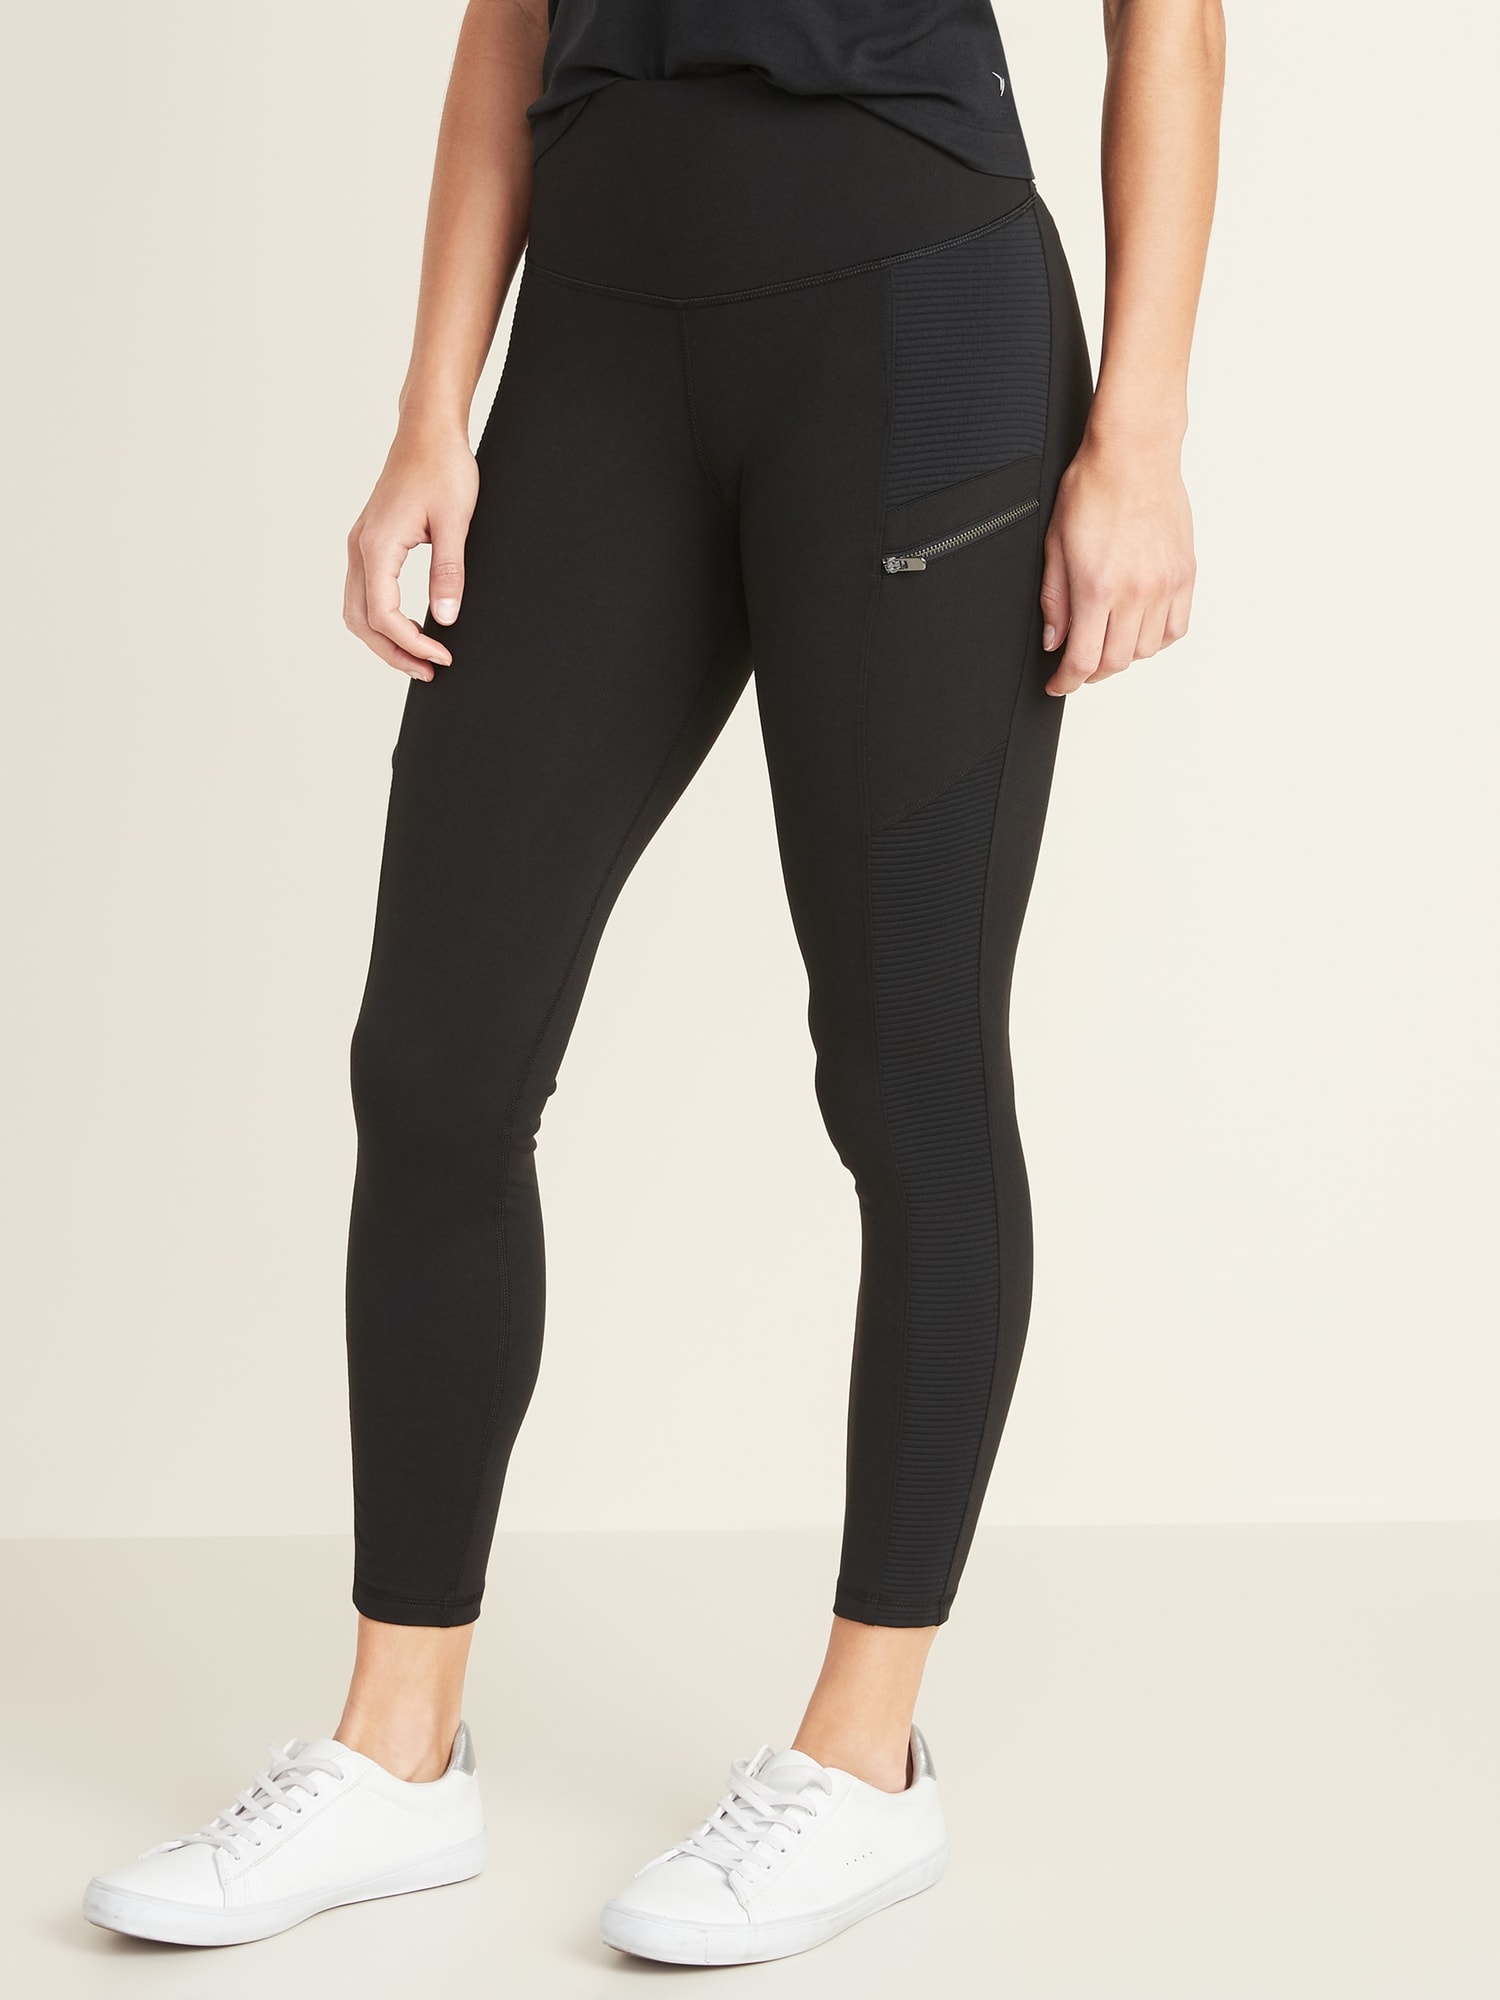 Old Navy Active Go Dry Athletic Leggings with Side Zip Pockets